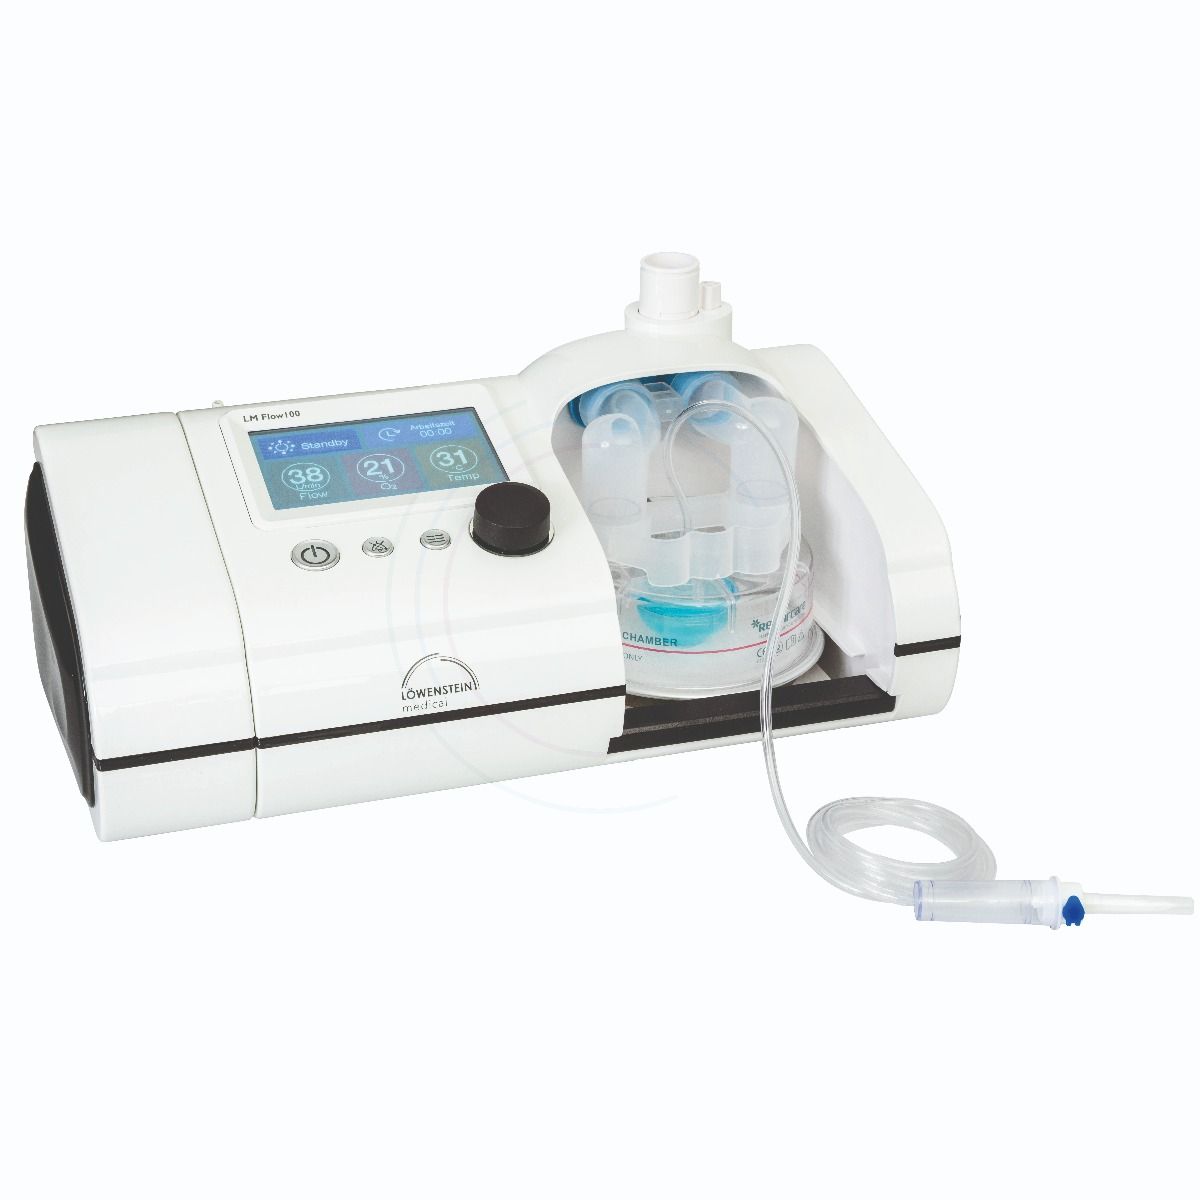 LM Flow 100 – High-Flow-Therapie System